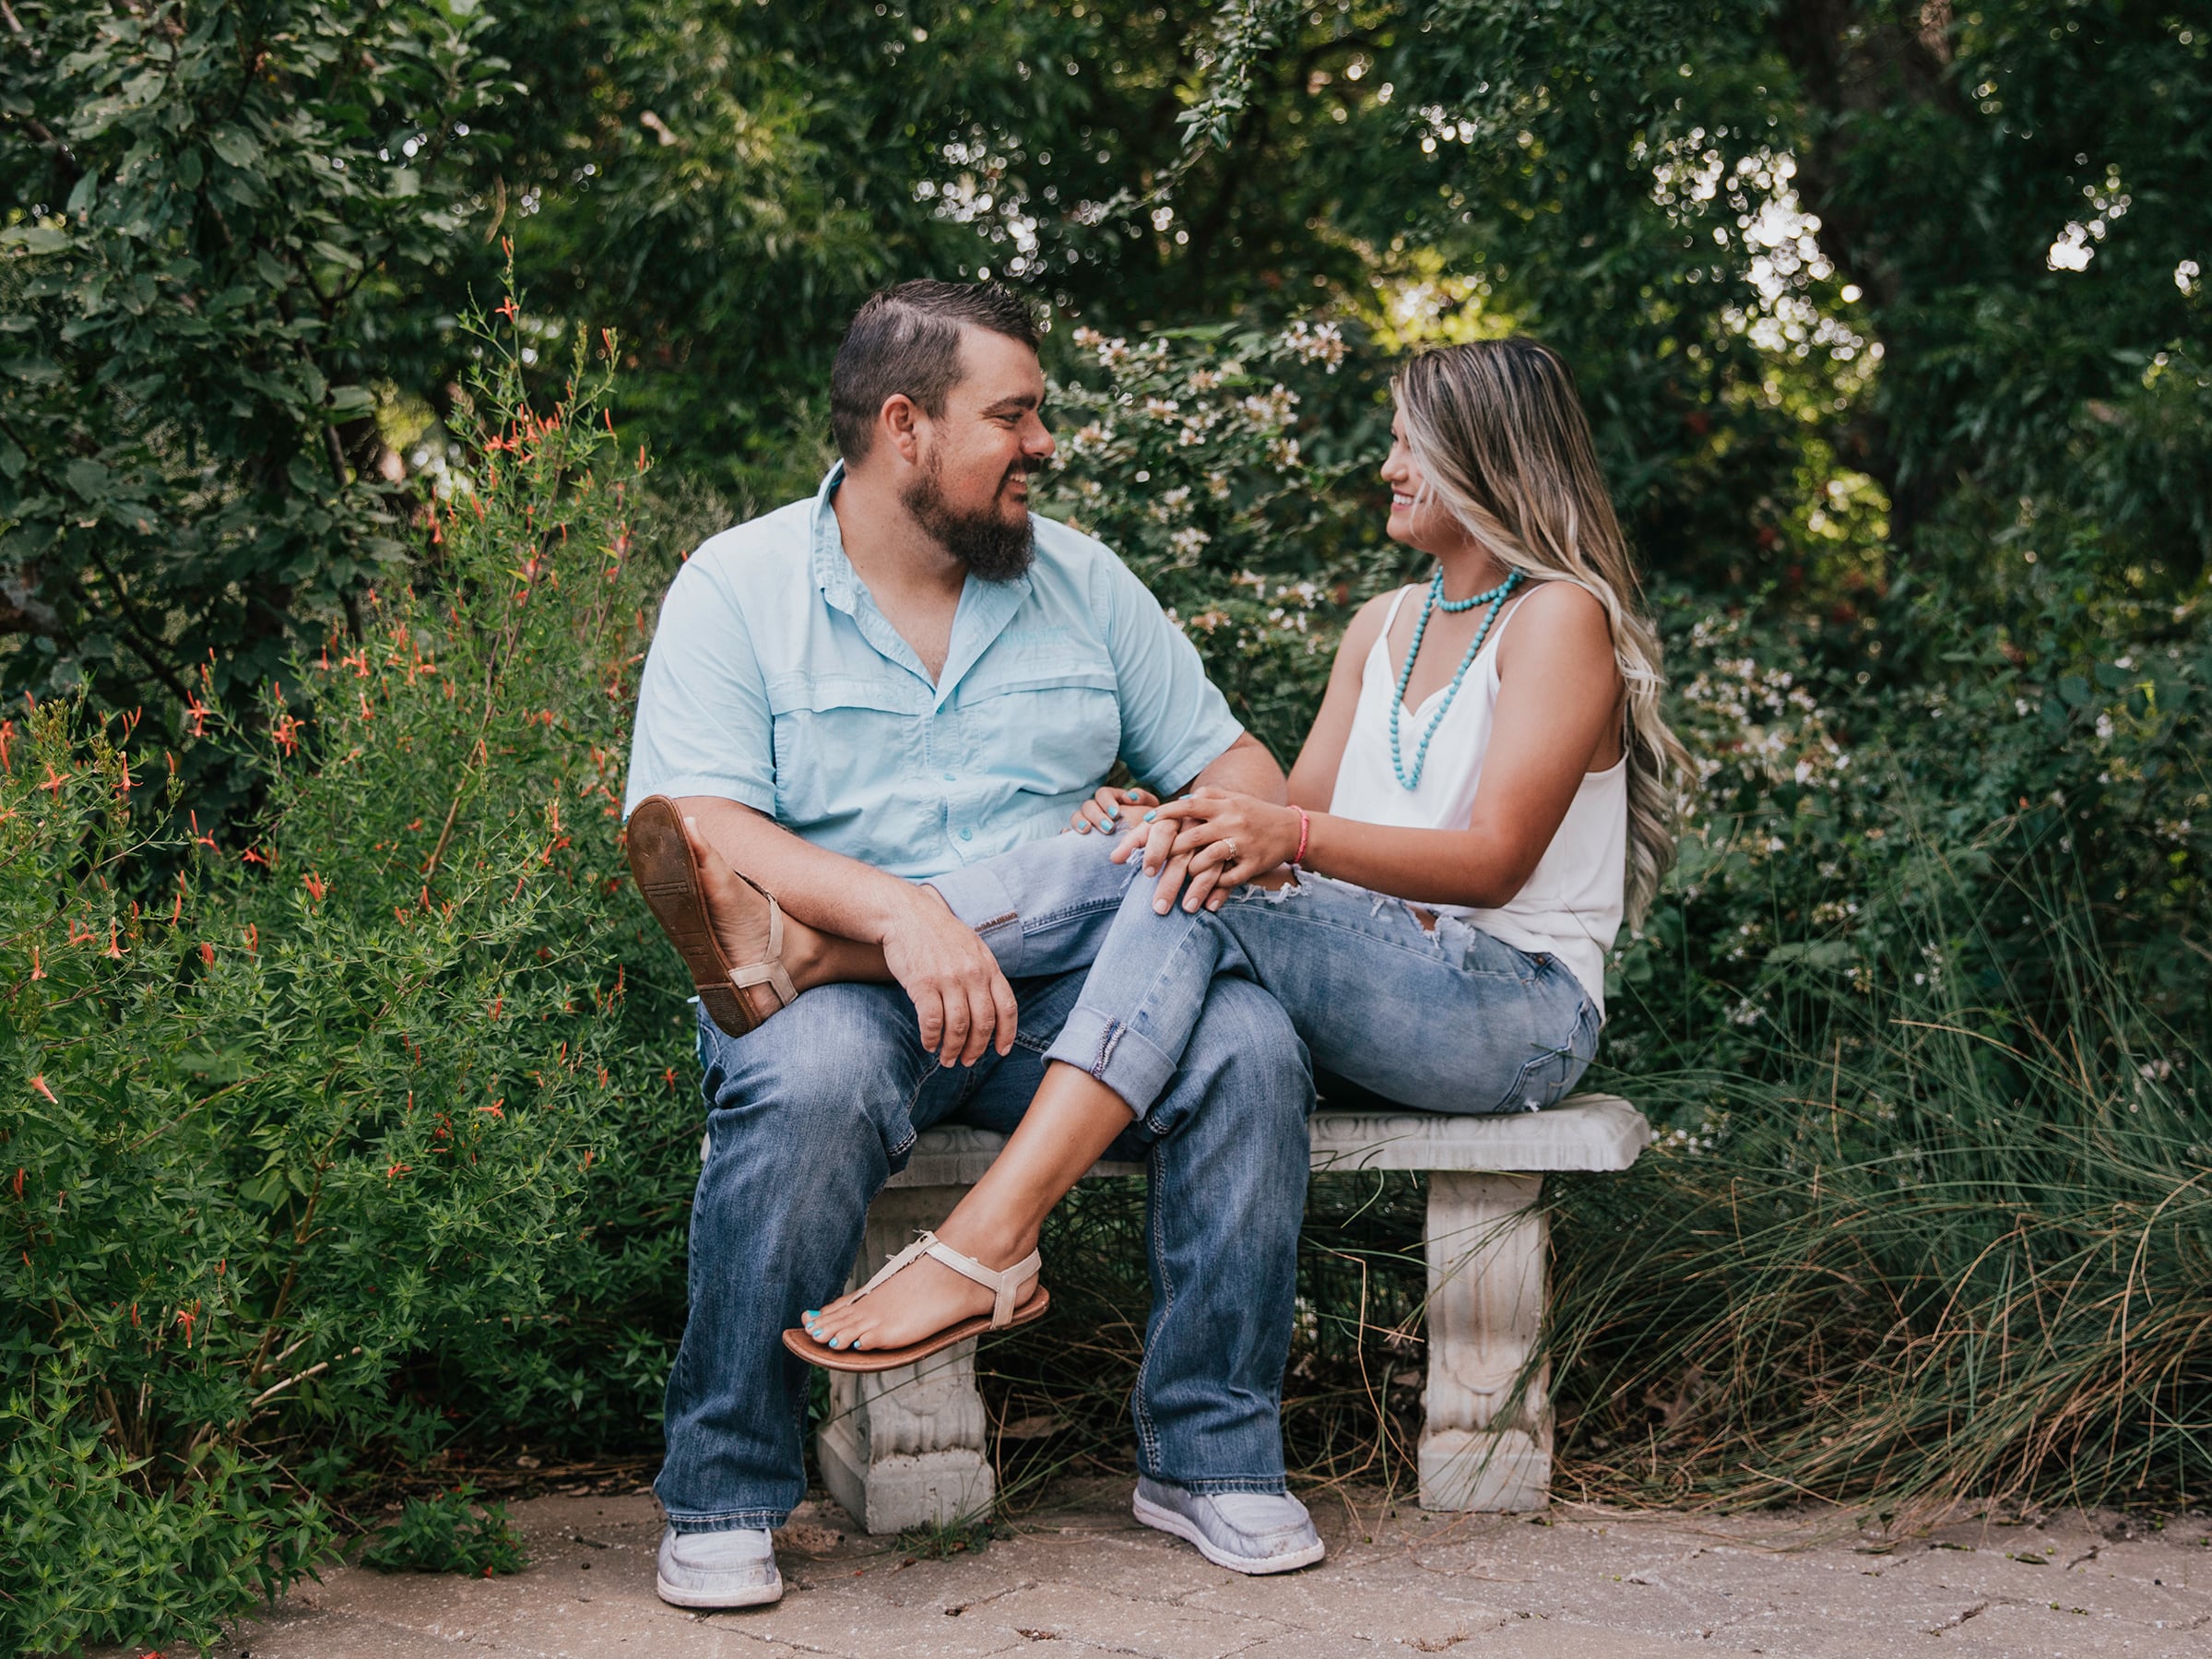 Jaci Statton and her husband, Dustin, in an engagement photo from 2021. Jaci had a partial molar pregnancy and was not treated by emergency rooms in Oklahoma. She traveled to Kansas for an abortion.